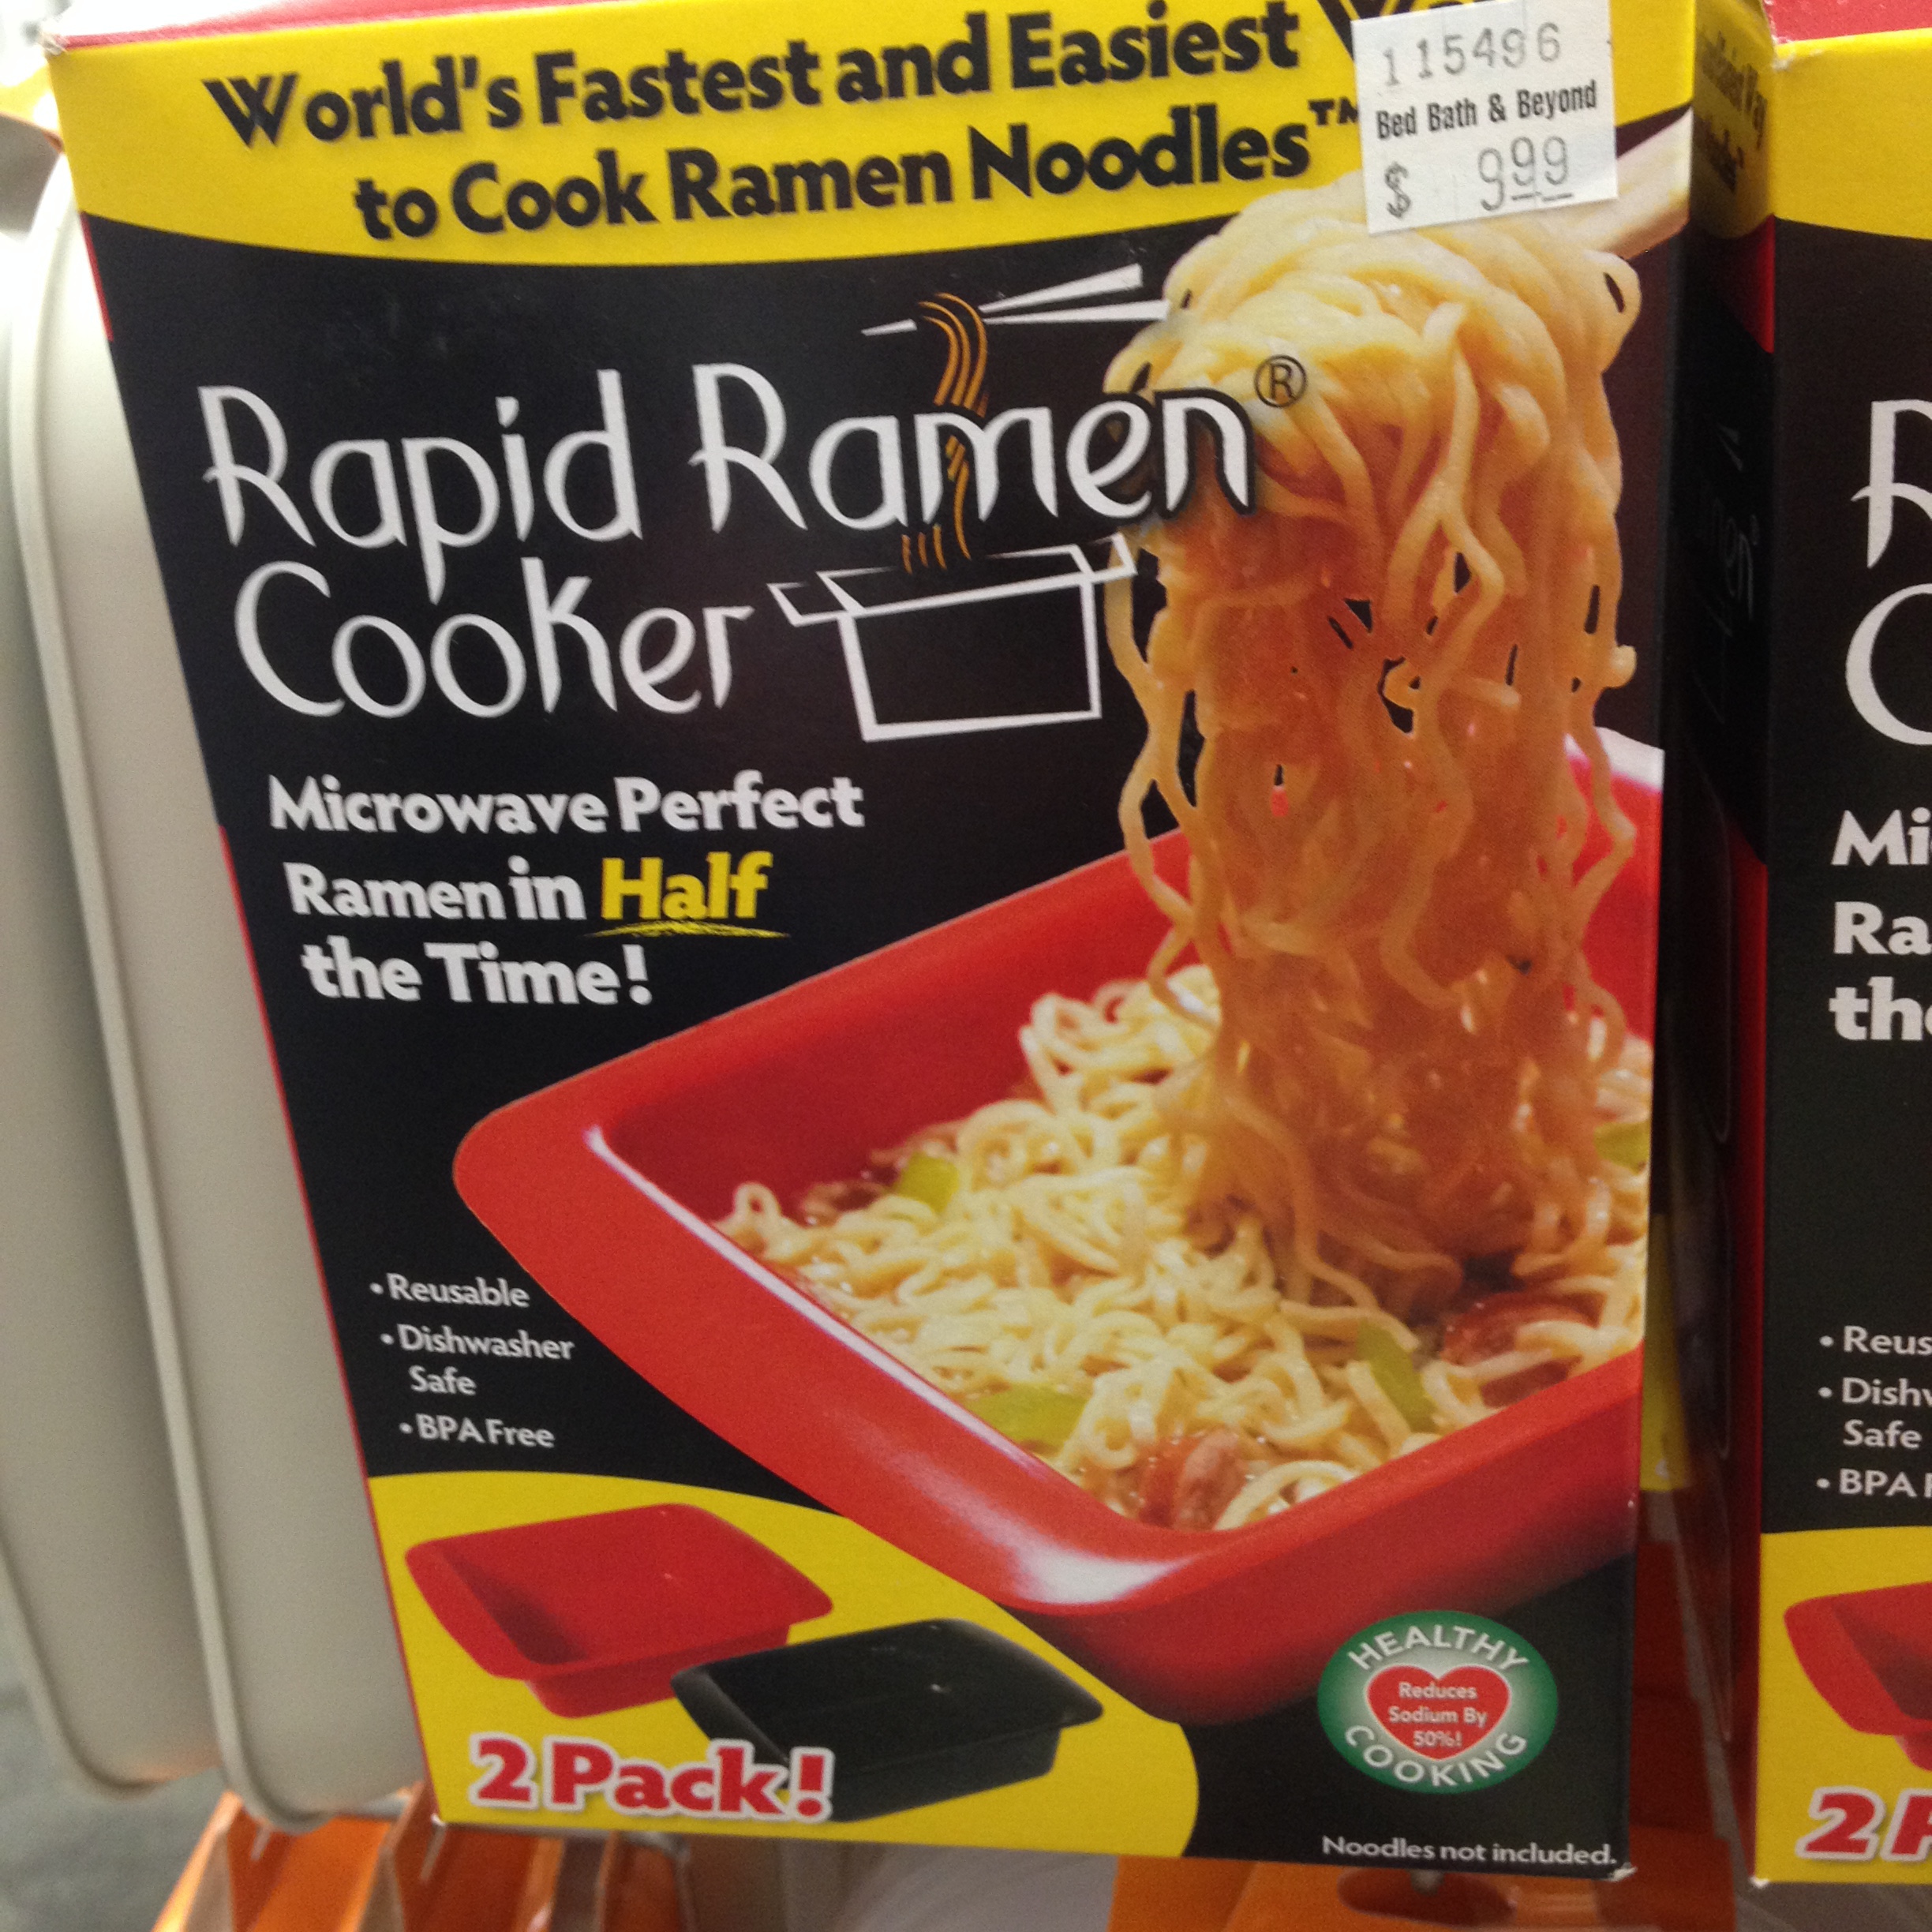 Microwave oven - World's Fastest and Easiest 115496 to Cook Ramen Noodles set but a bevont $999 Rapid Ramen Cooker Mi Microwave Perfect Ramen in Half the Time! Ra th Reusable Diese Sale Bpa Free Reus Dishu Safe Bpai 2 Pack!